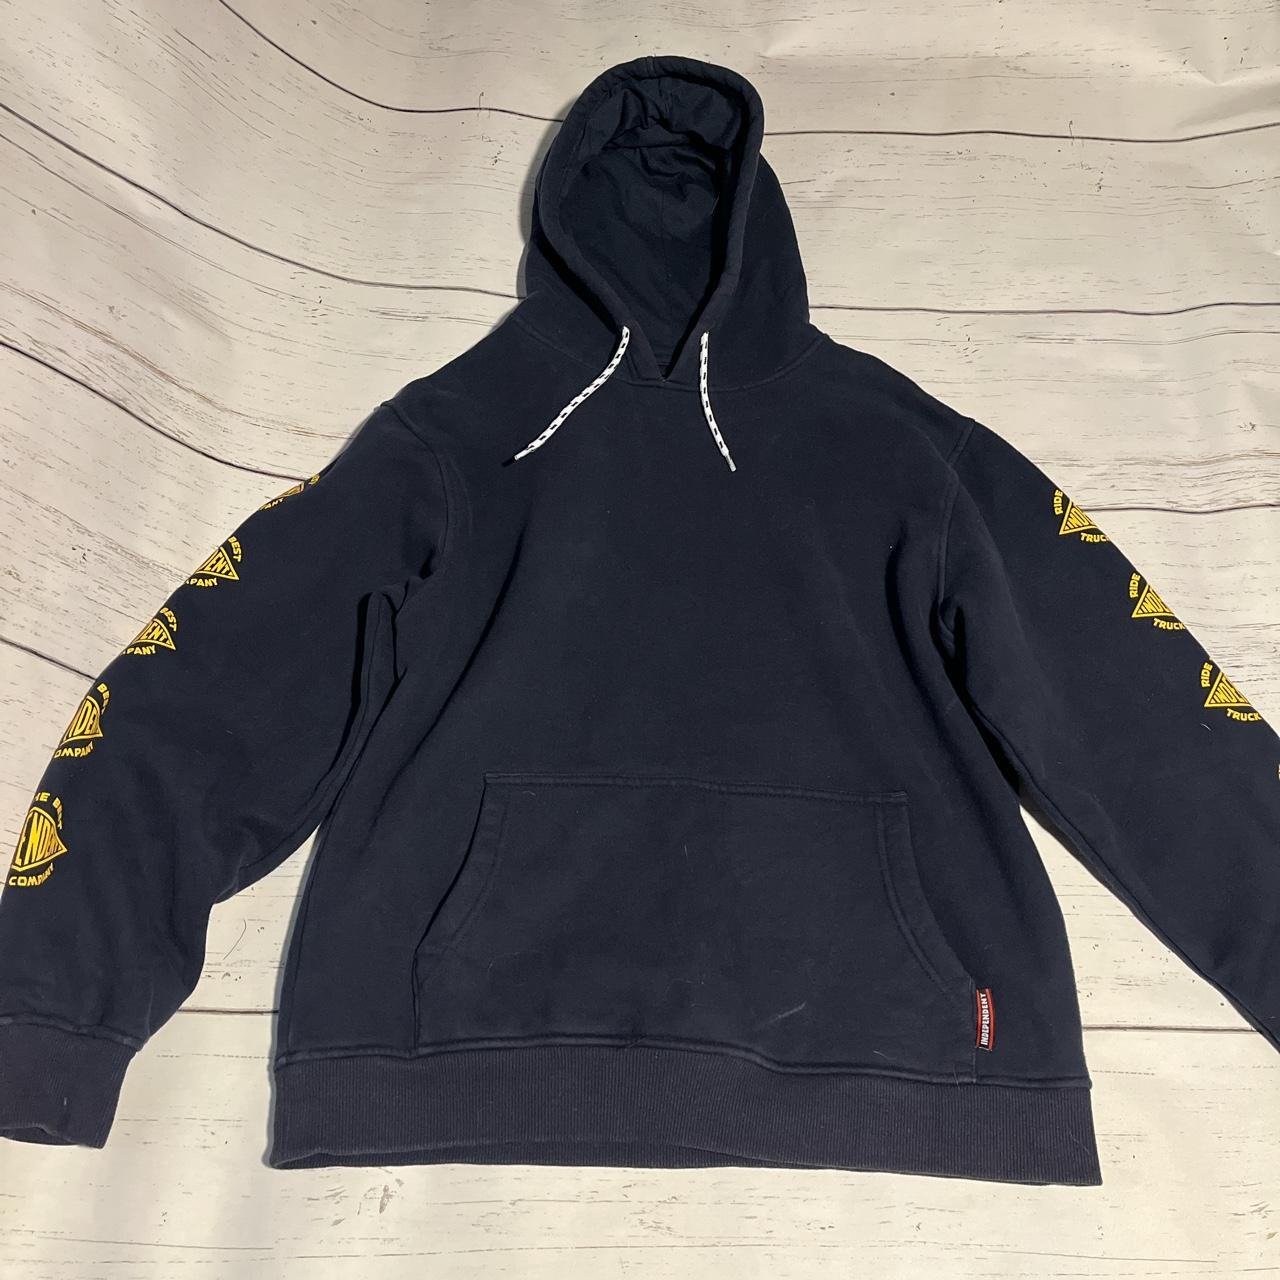 independent hoodie very lil fading size m - Depop